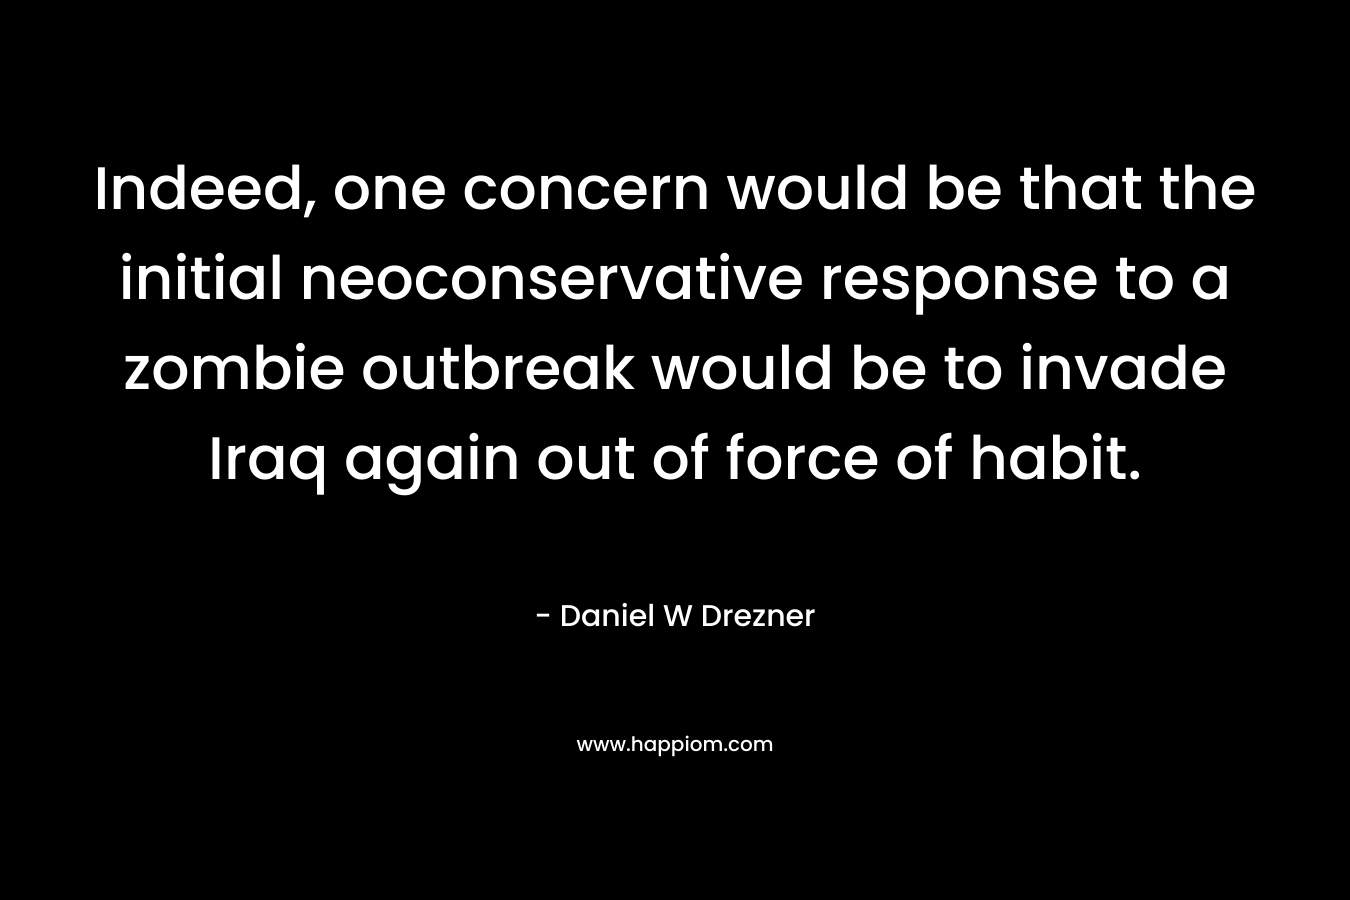 Indeed, one concern would be that the initial neoconservative response to a zombie outbreak would be to invade Iraq again out of force of habit. – Daniel W Drezner